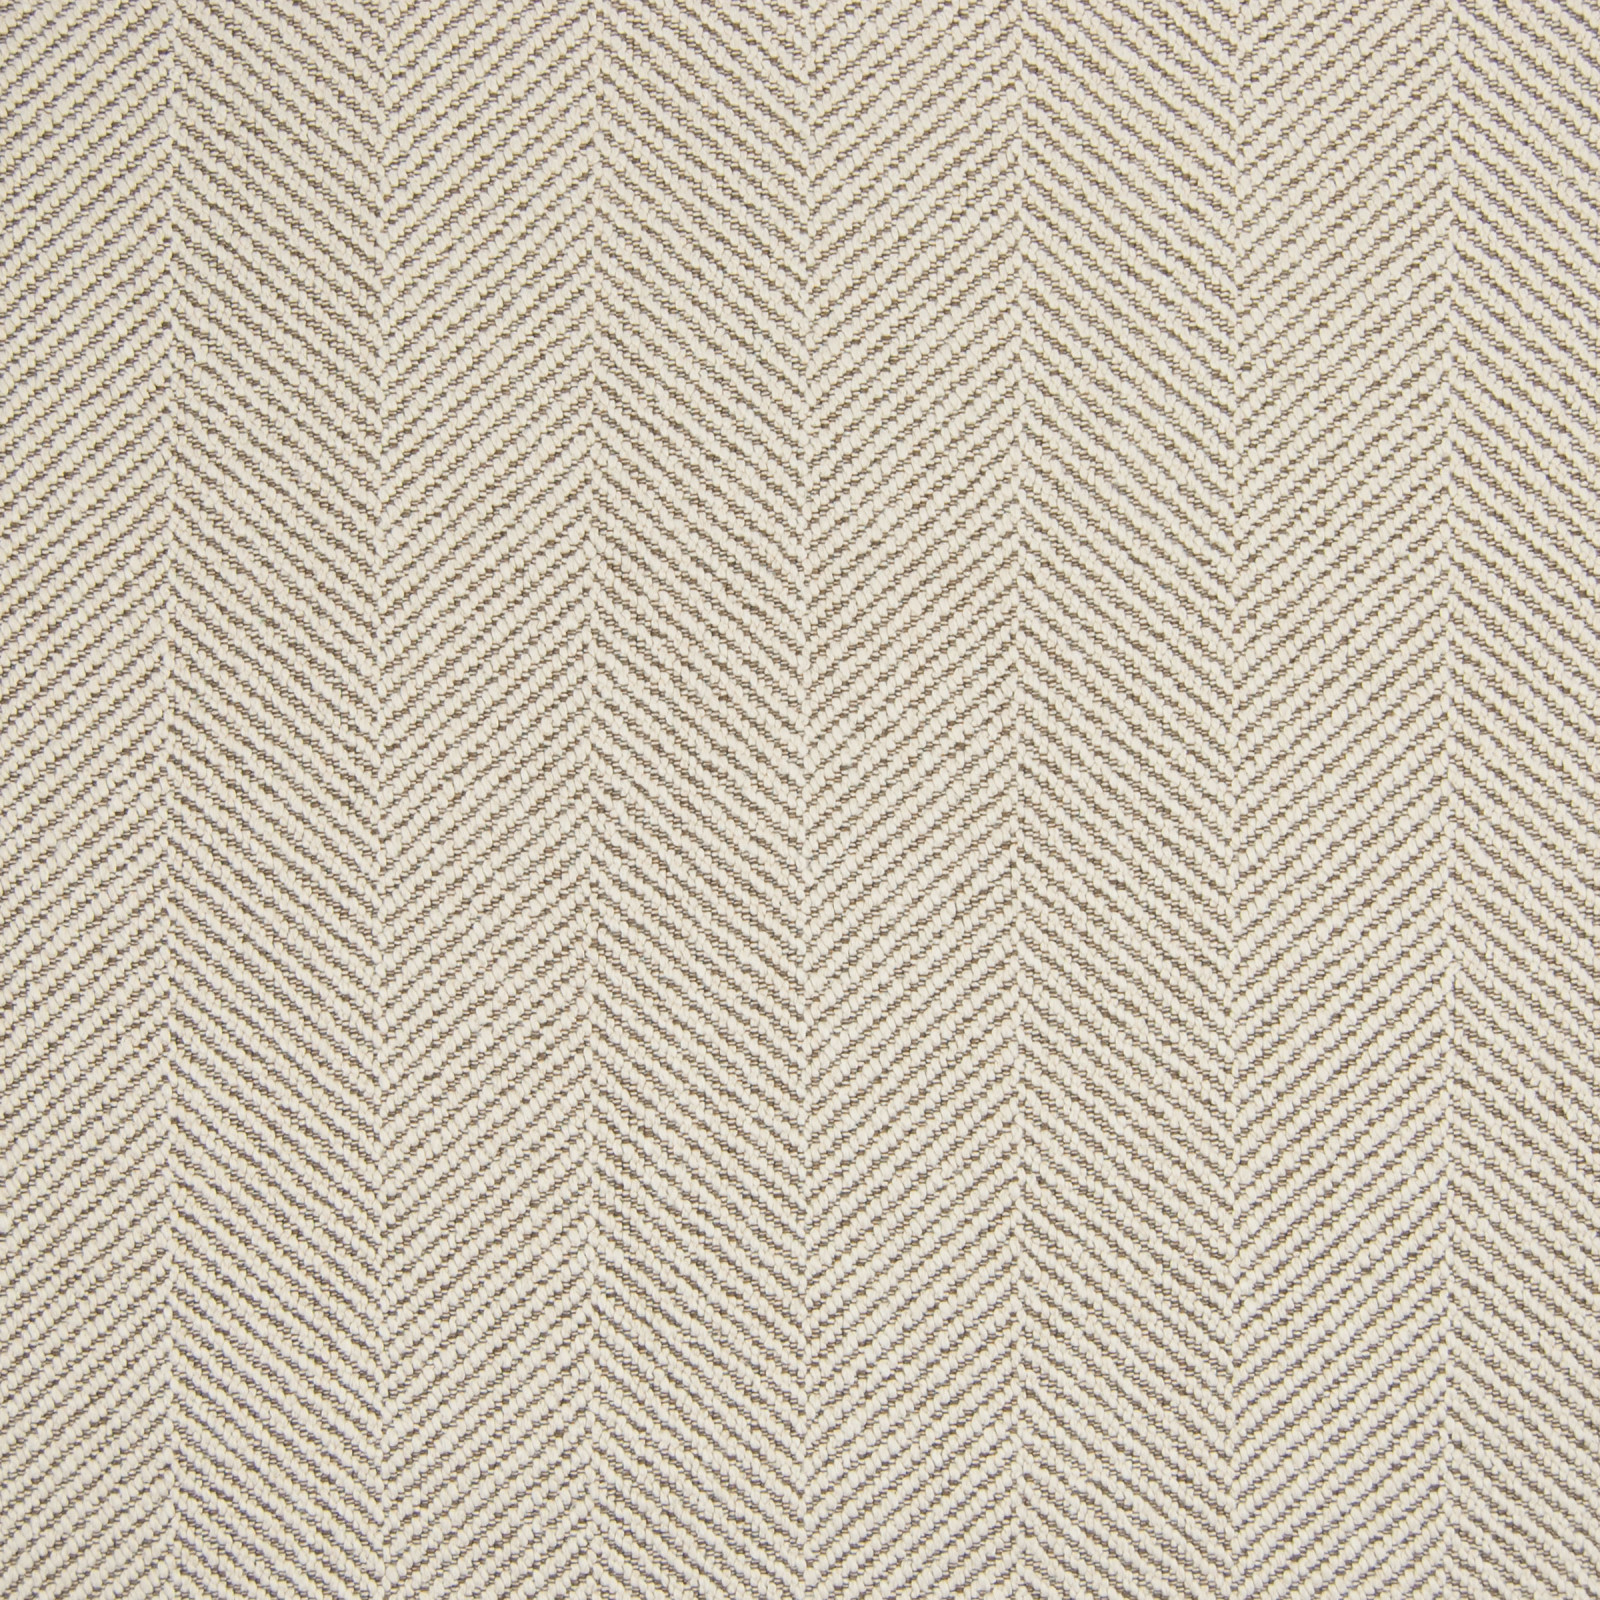 Sand Neutral Solid Woven Upholstery Fabric